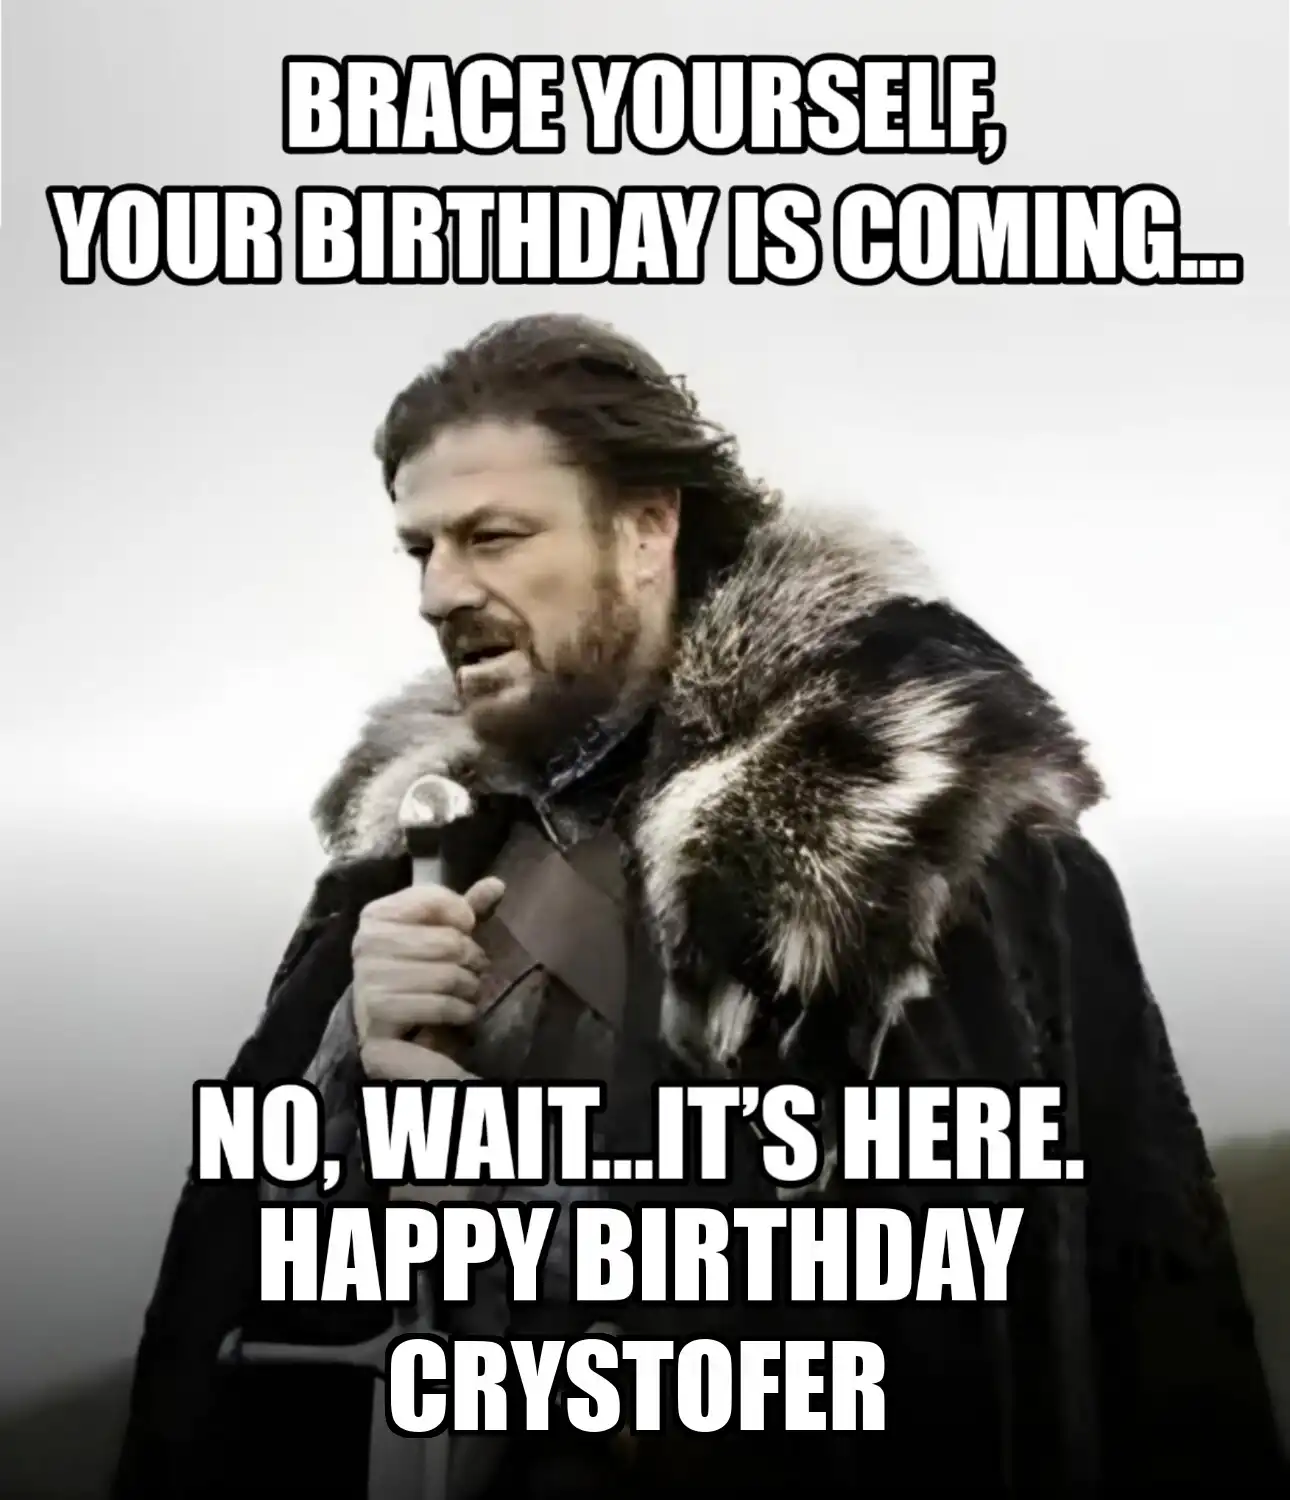 Happy Birthday Crystofer Brace Yourself Your Birthday Is Coming Meme